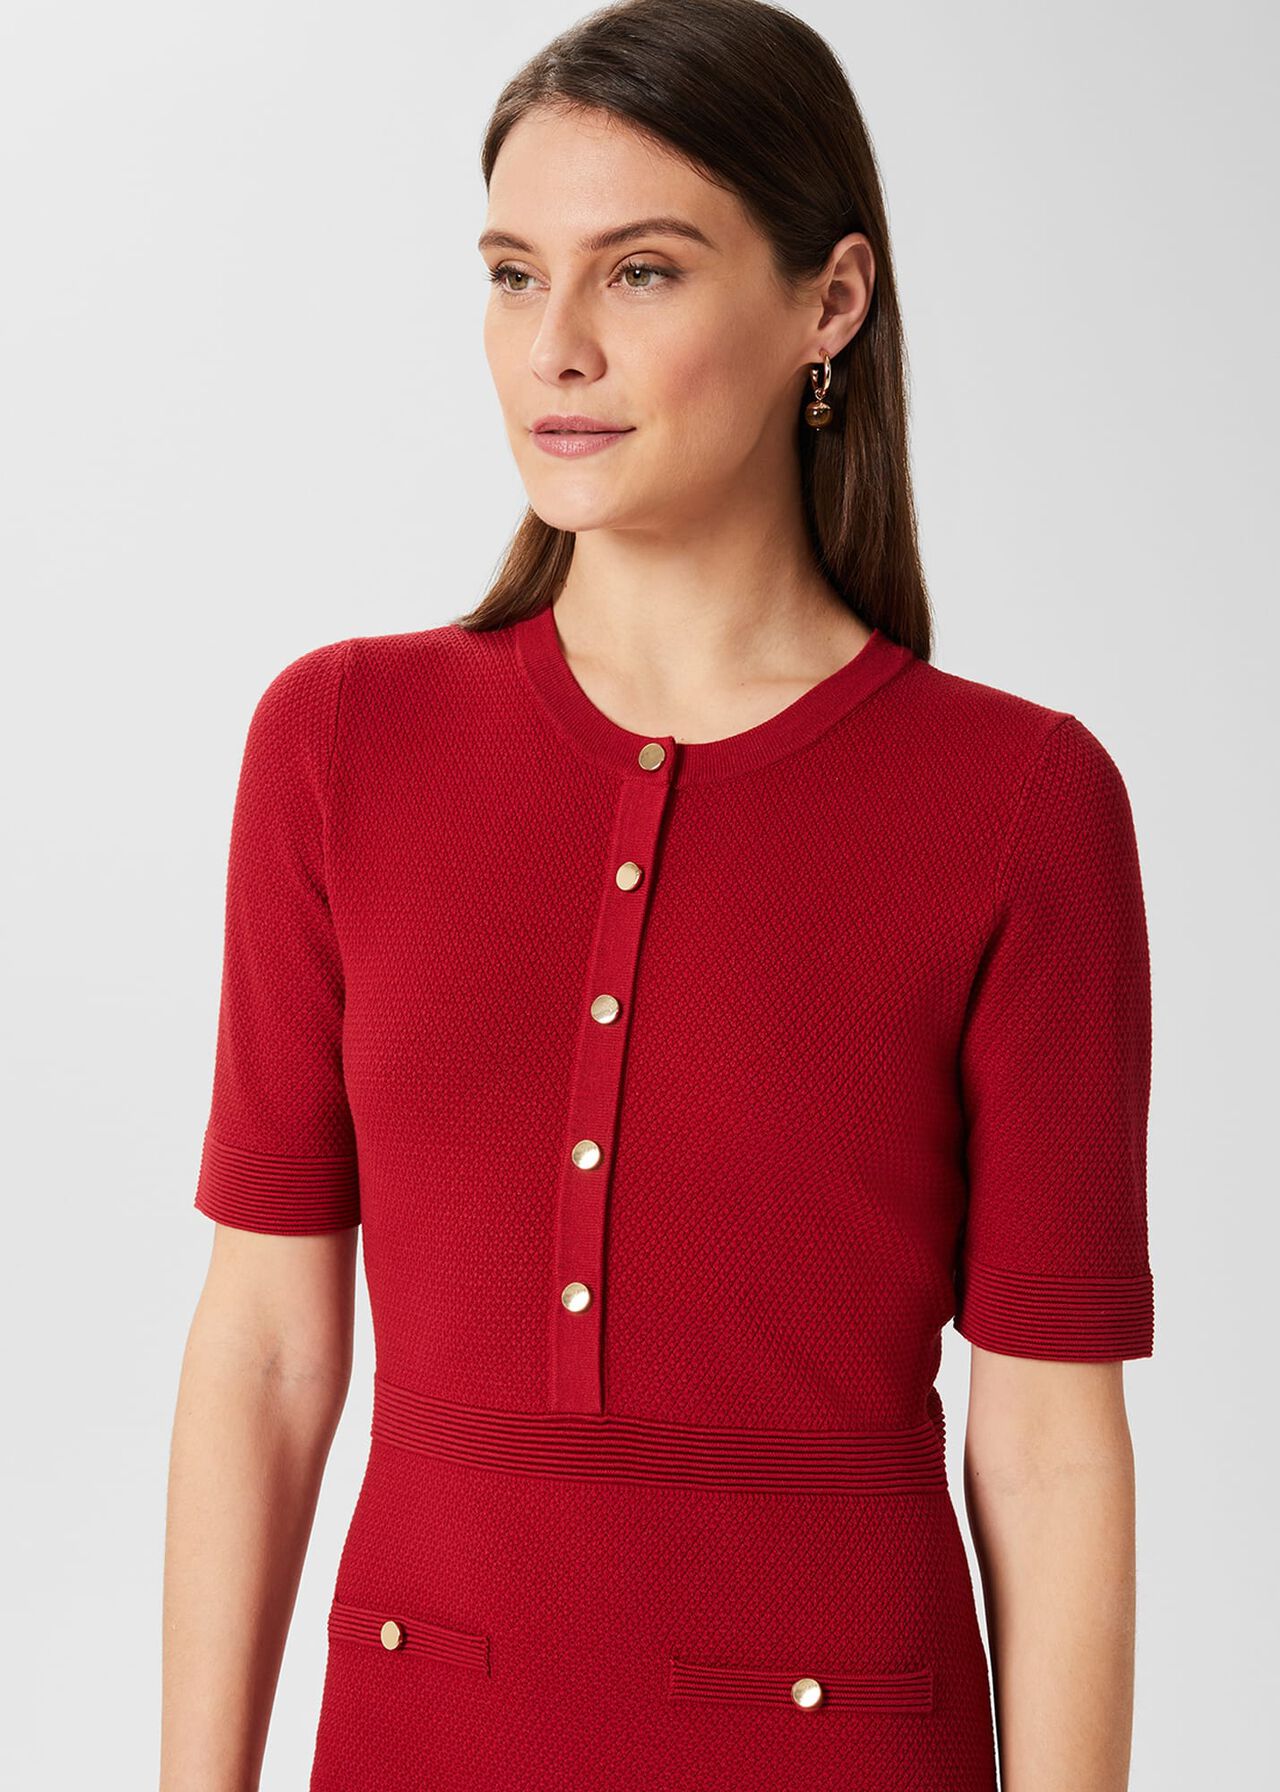 Noa Knitted Dress, Deep Red, hi-res